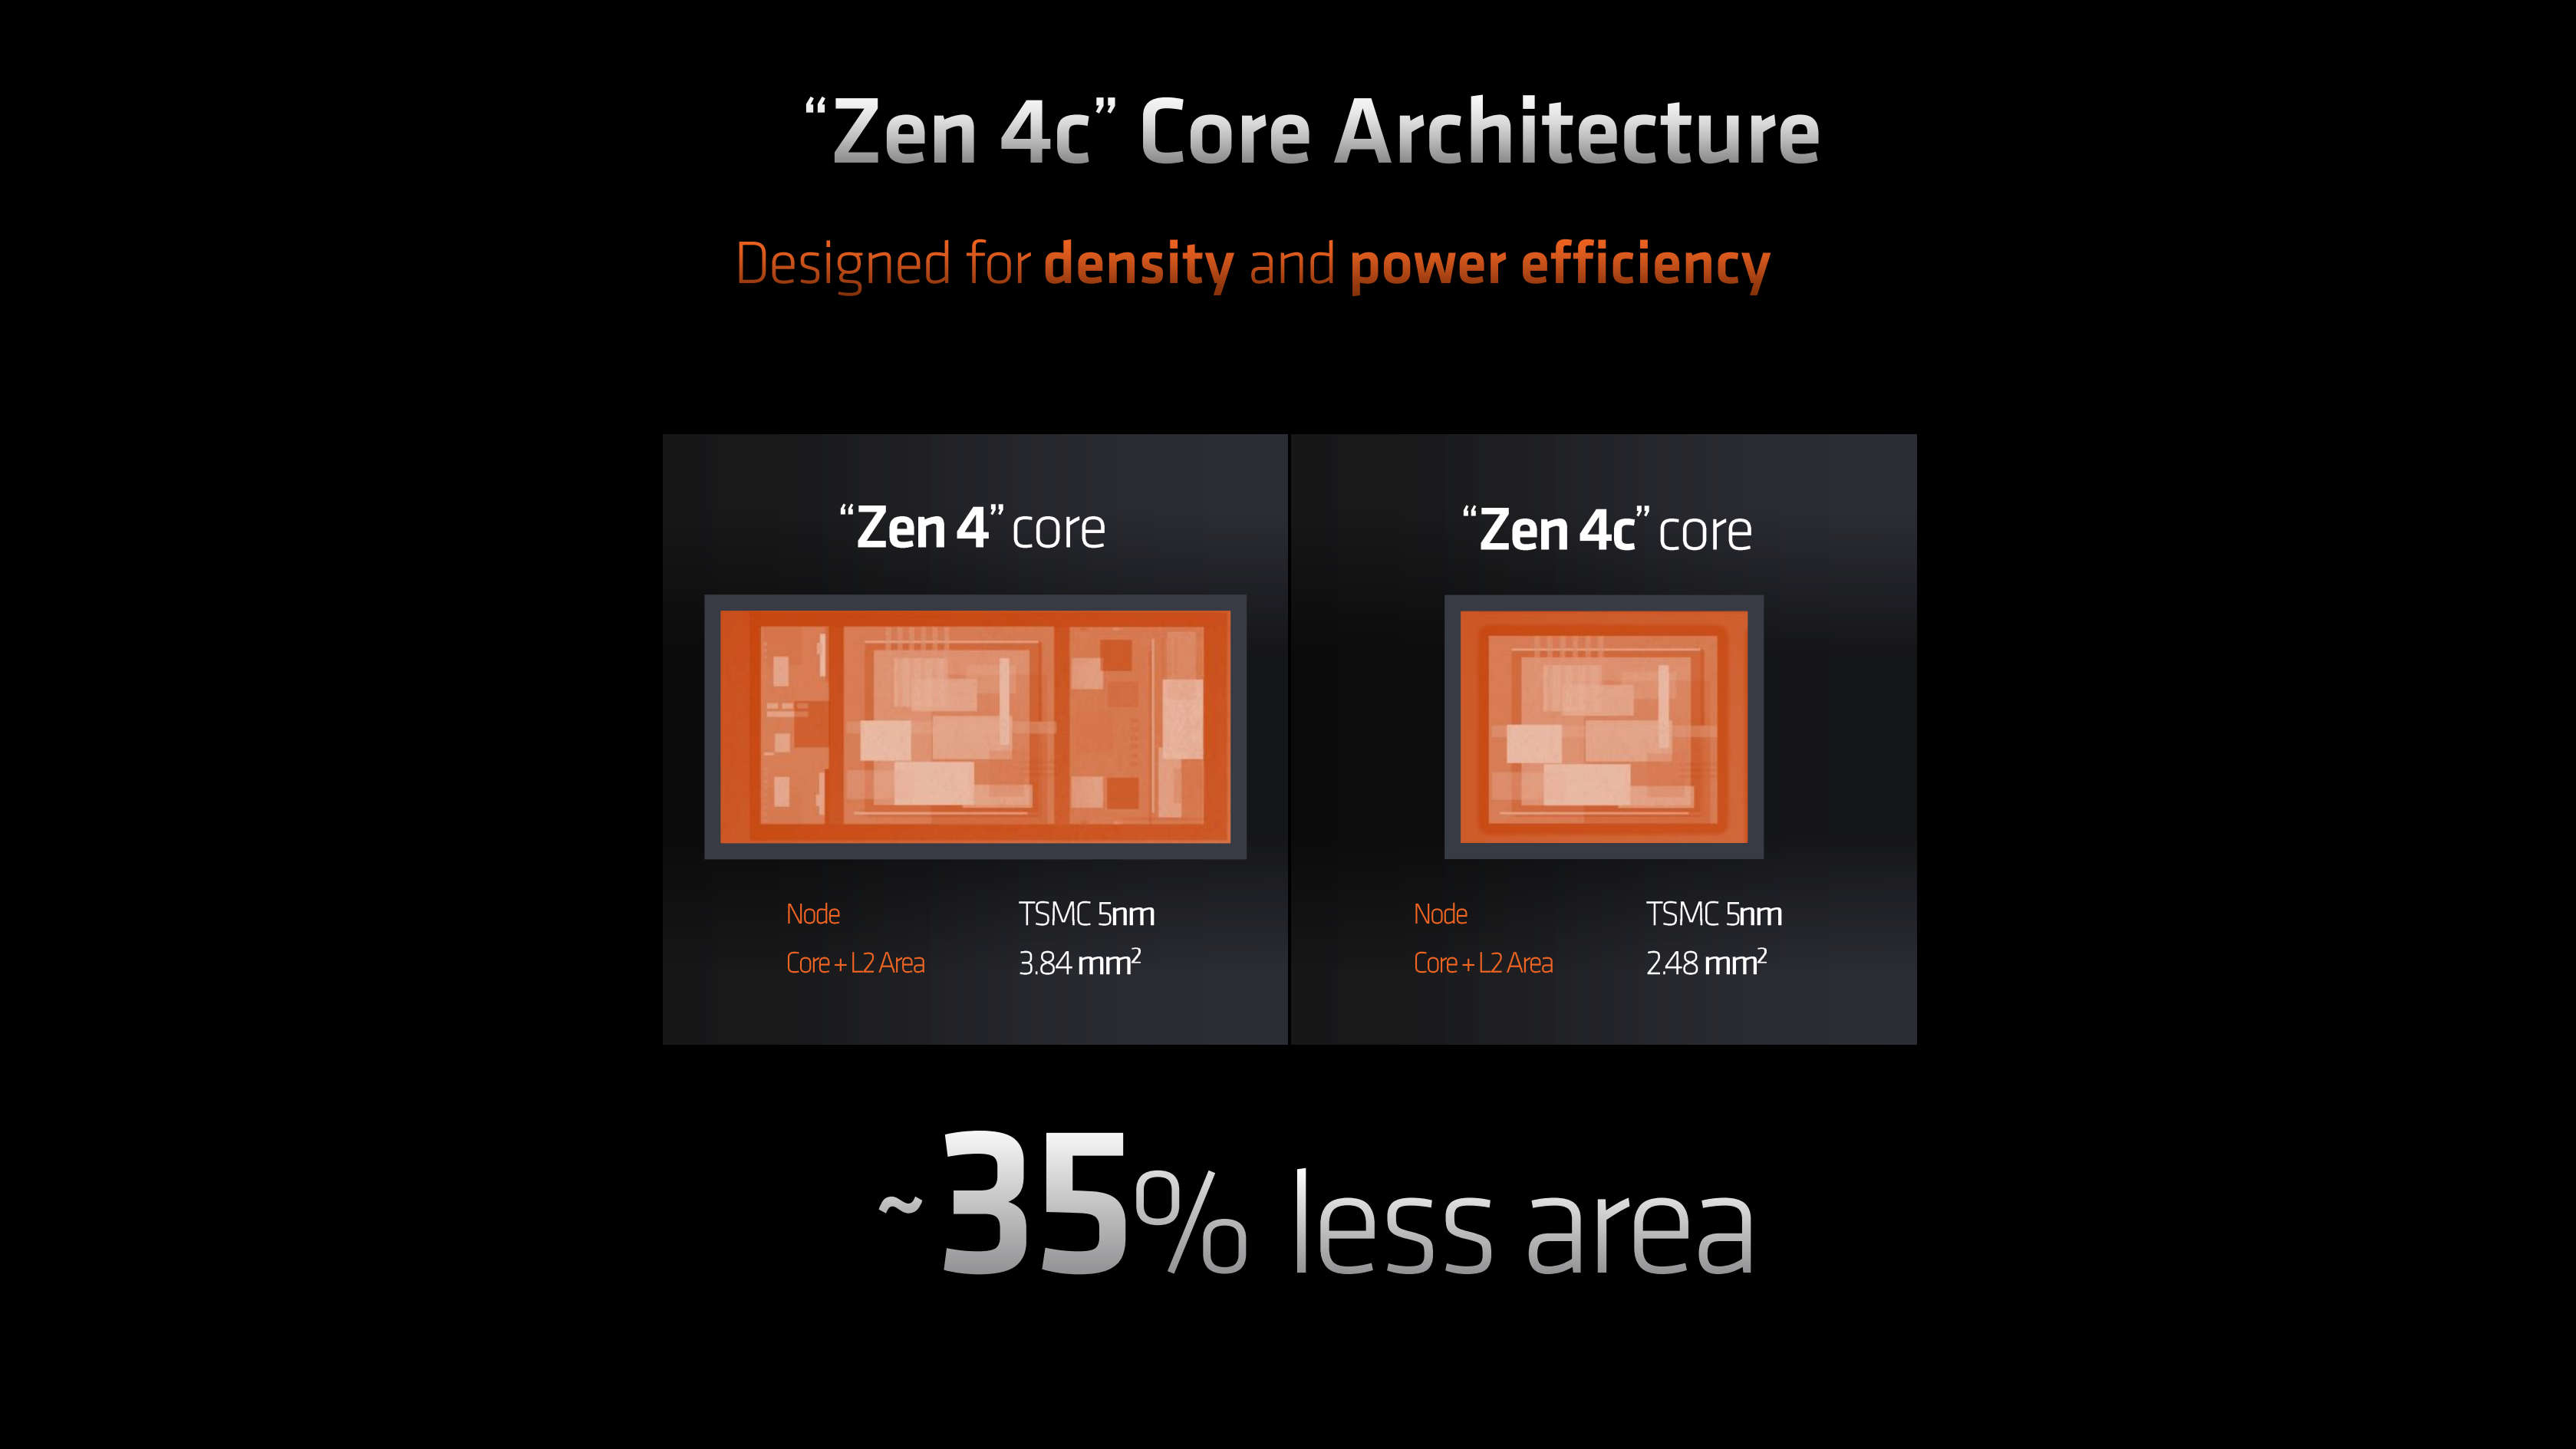 A visual comparison of the size difference between a Zen 4 core and a Zen 4c core